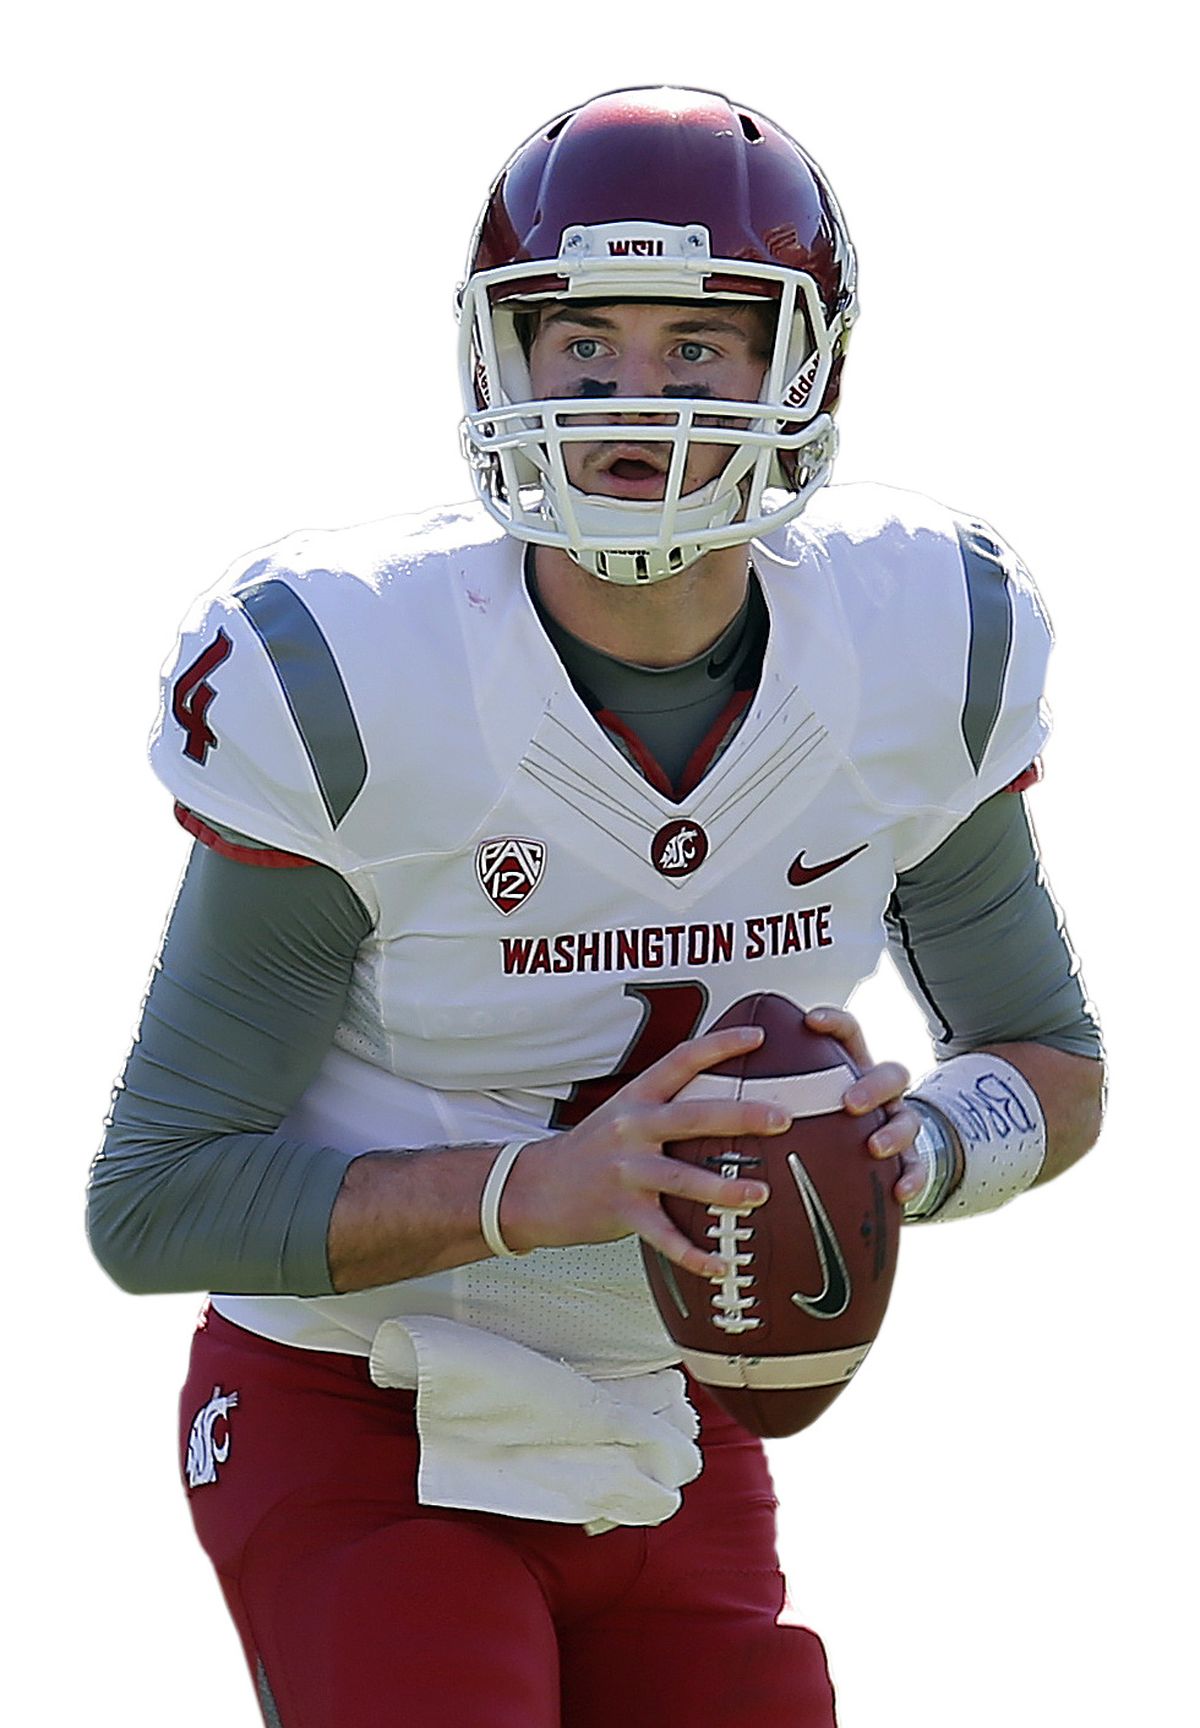 WSU QB Luke Falk has thrown for 1,421 yards and 10 touchdowns in just over 11 quarters.